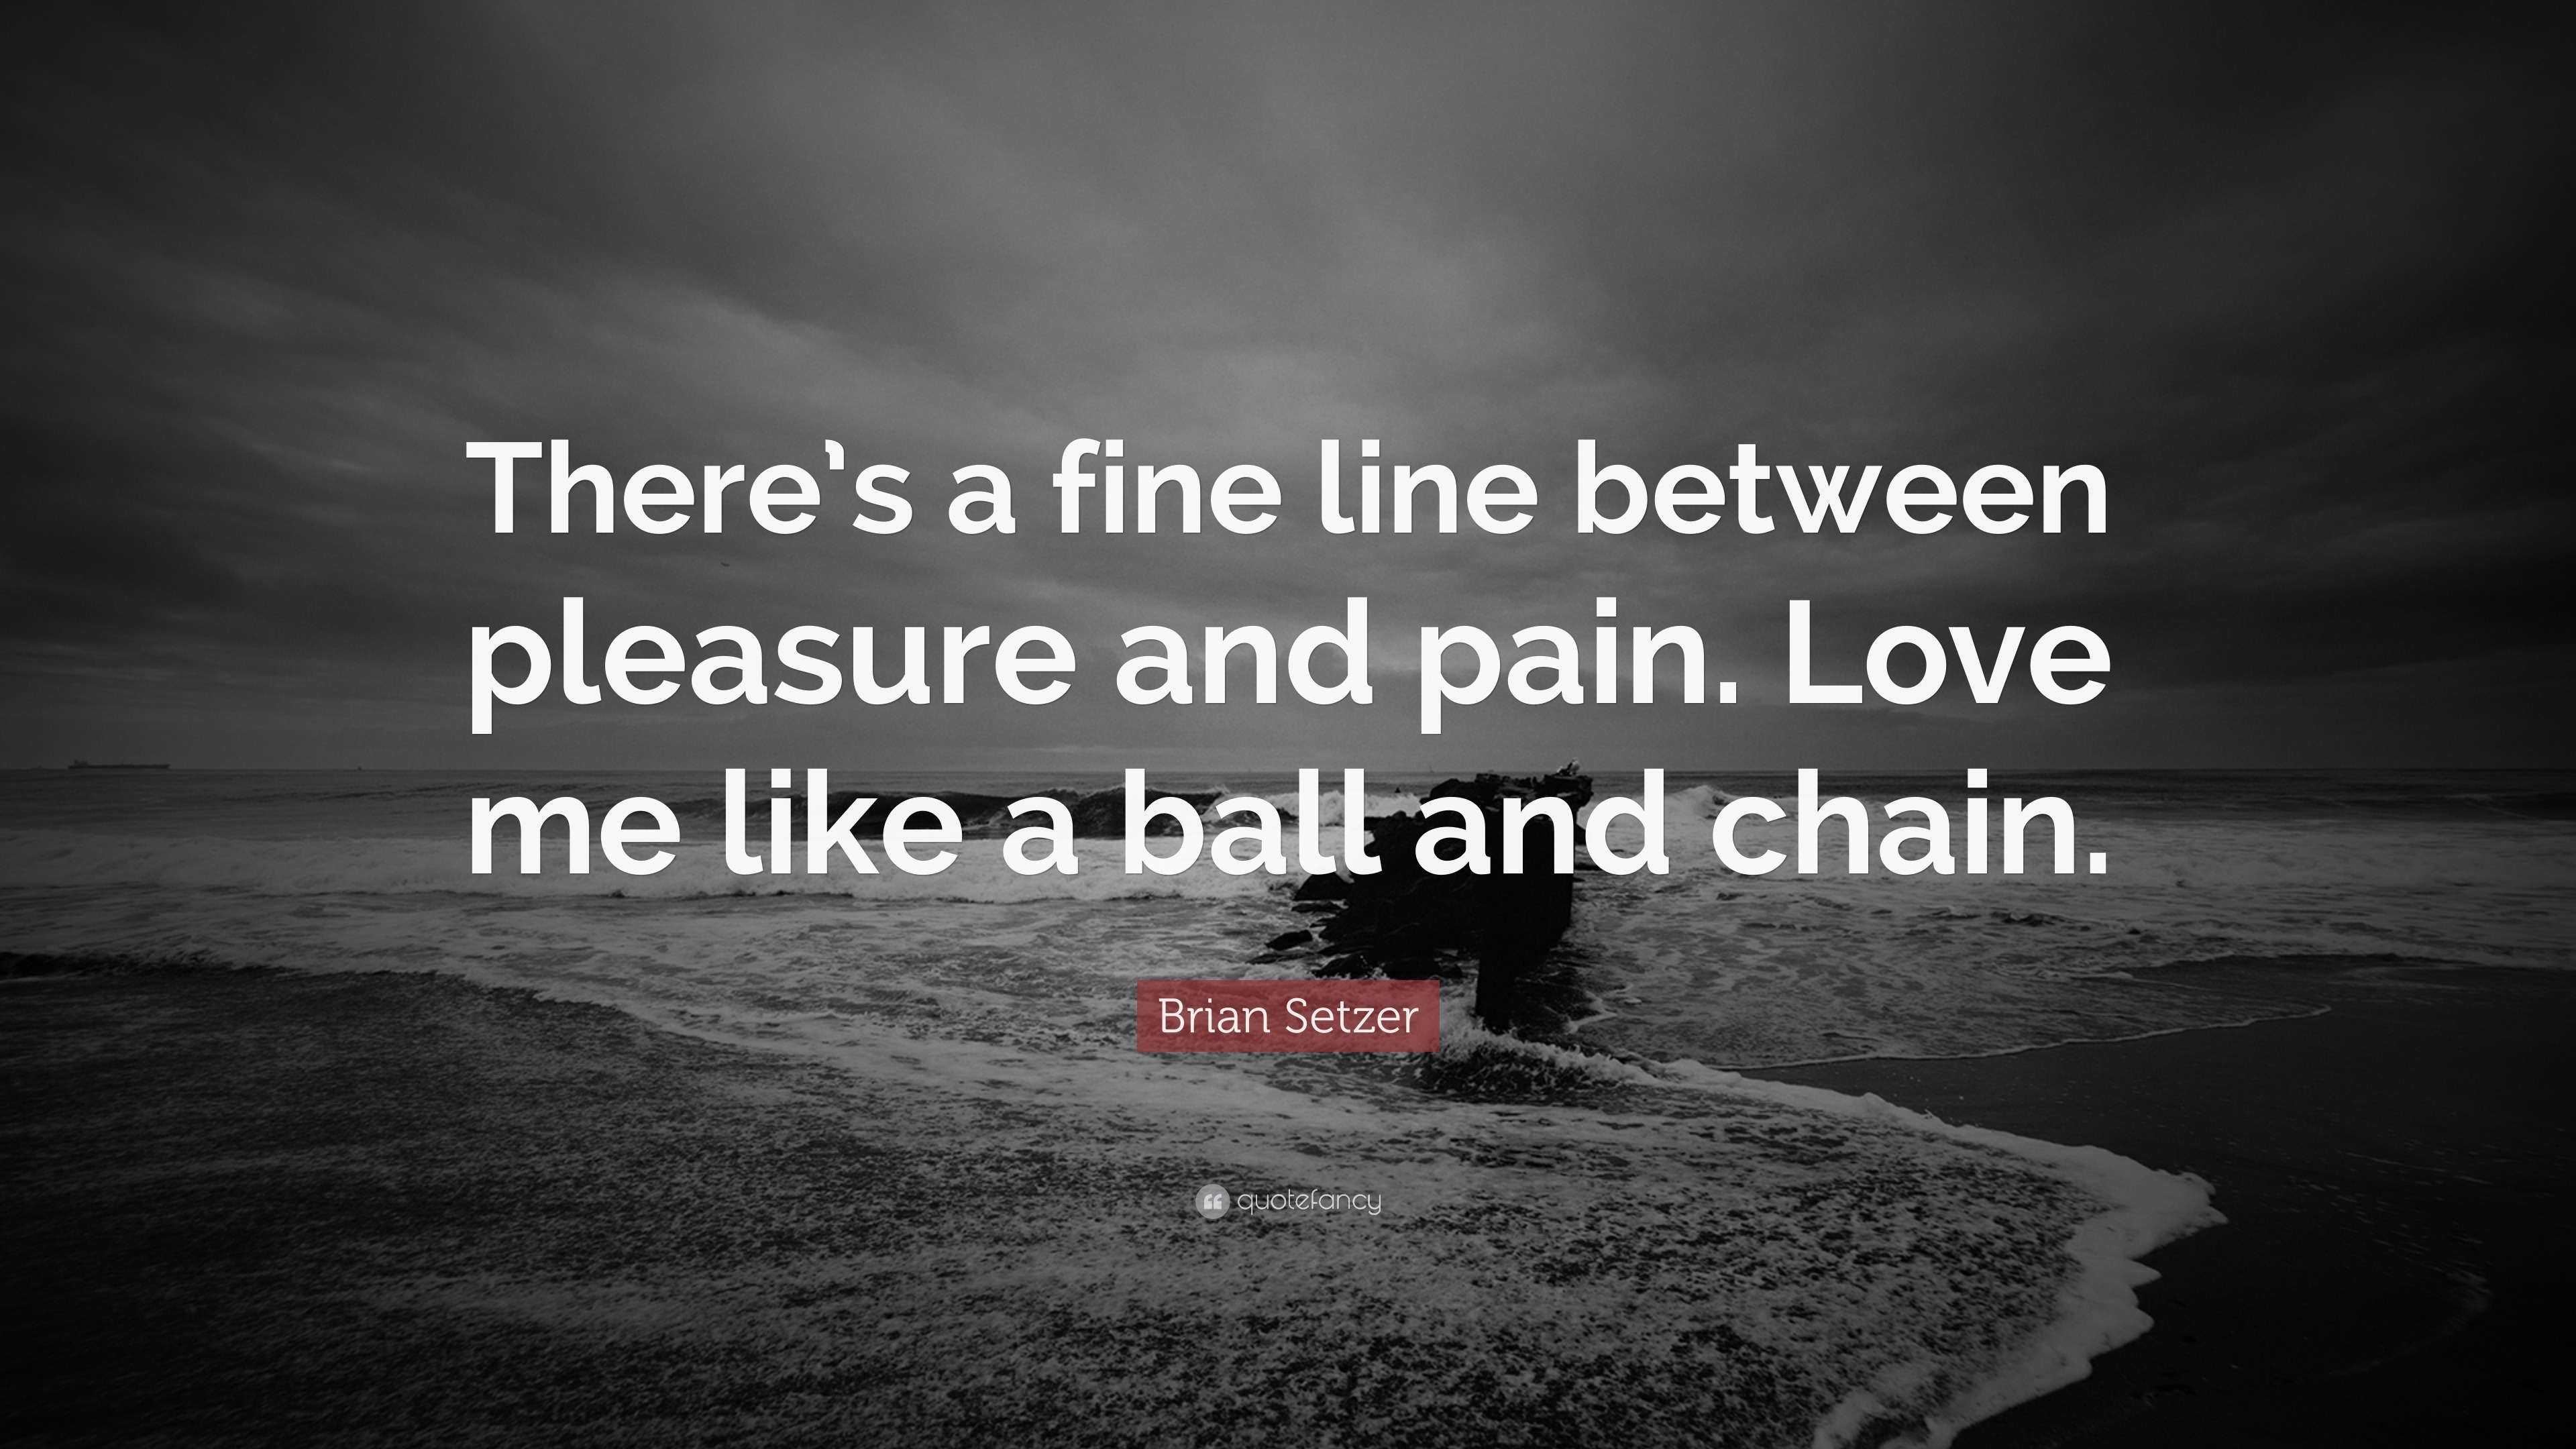 Brian Setzer Quote “There s a fine line between pleasure and pain Love me